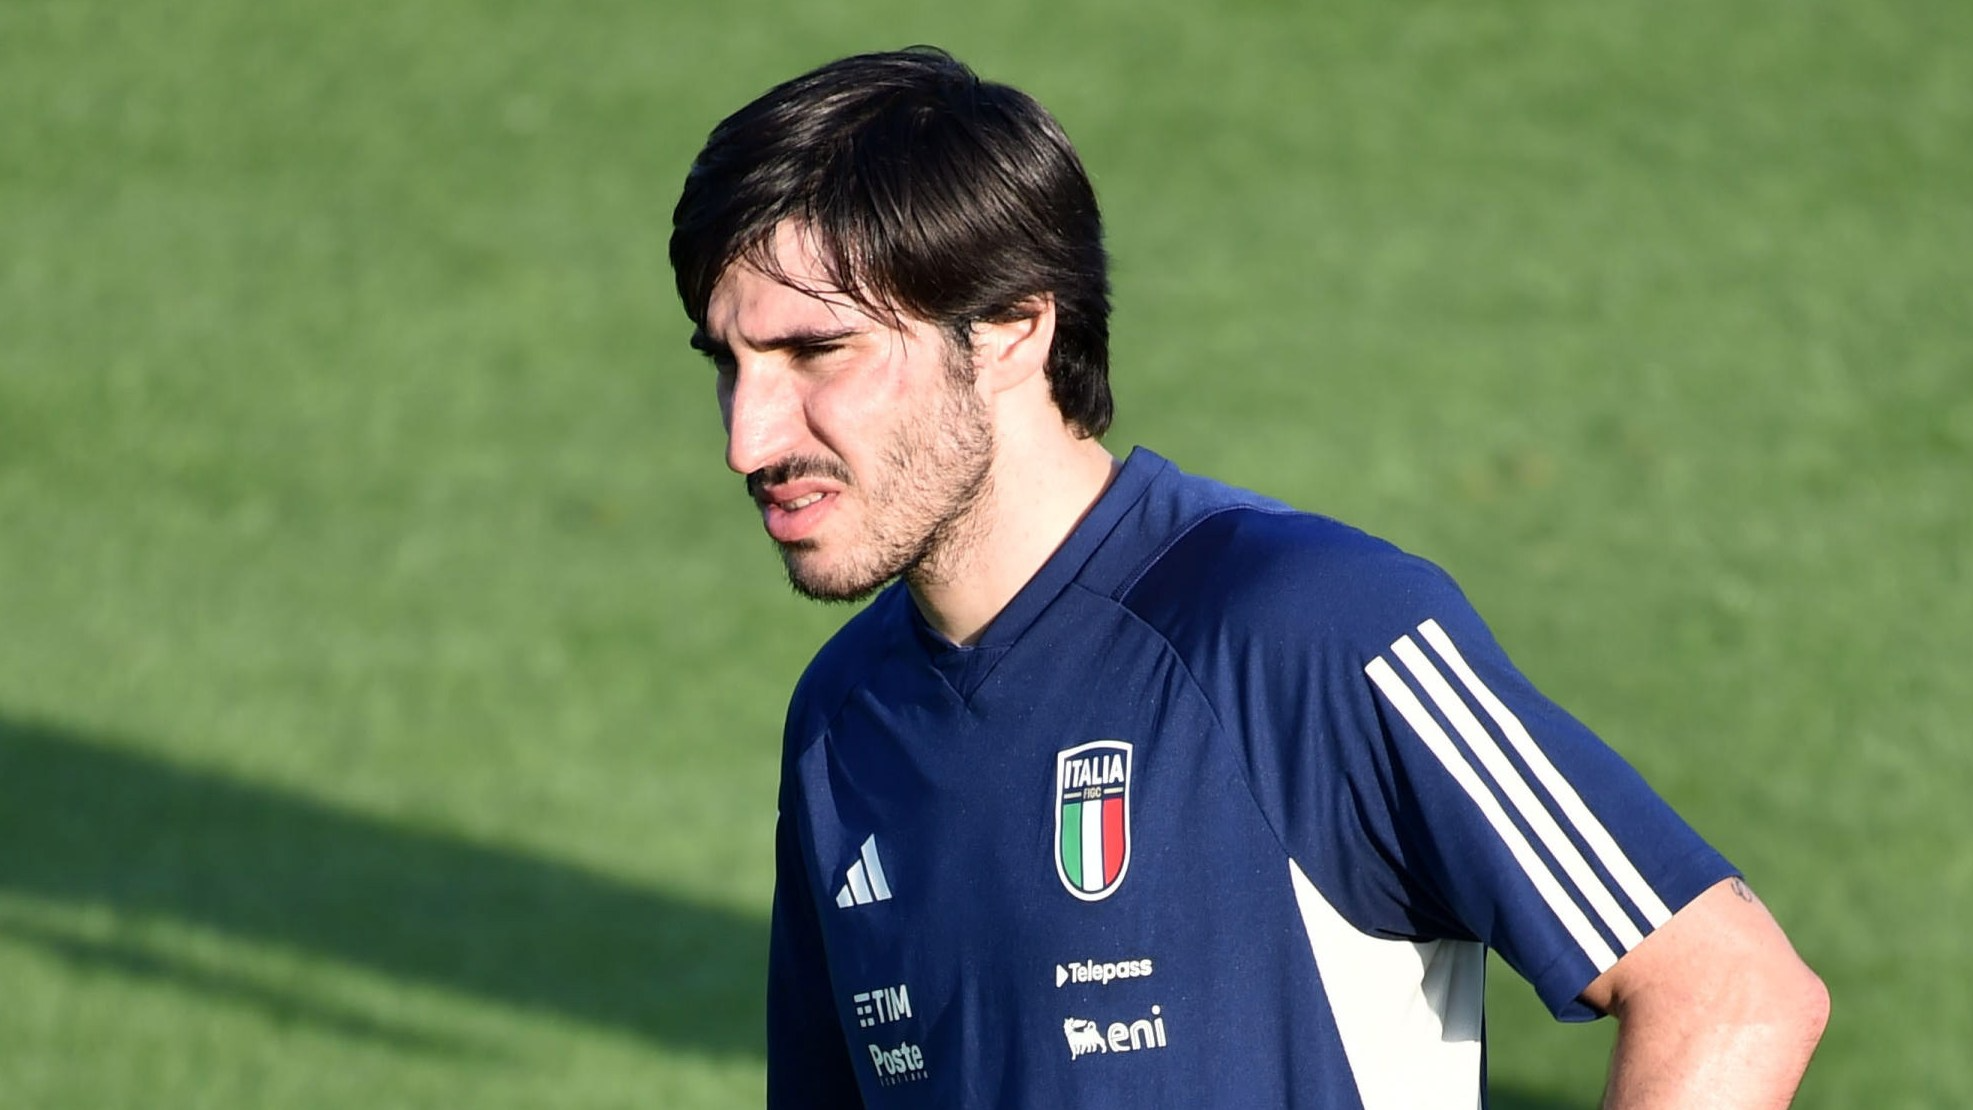 Italy Midfielder Tonali Confesses To Betting On AC Milan, Faces One Year Suspension